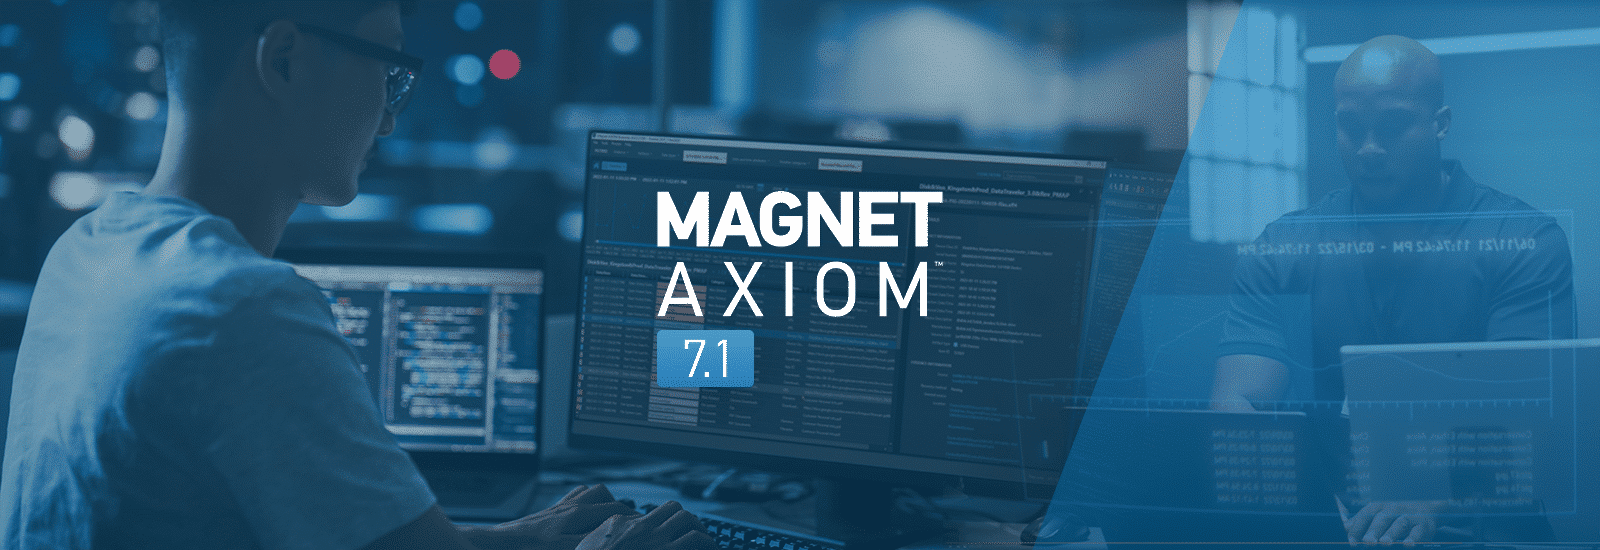 A decorative header for the Magnet AXIOM 7.1 release